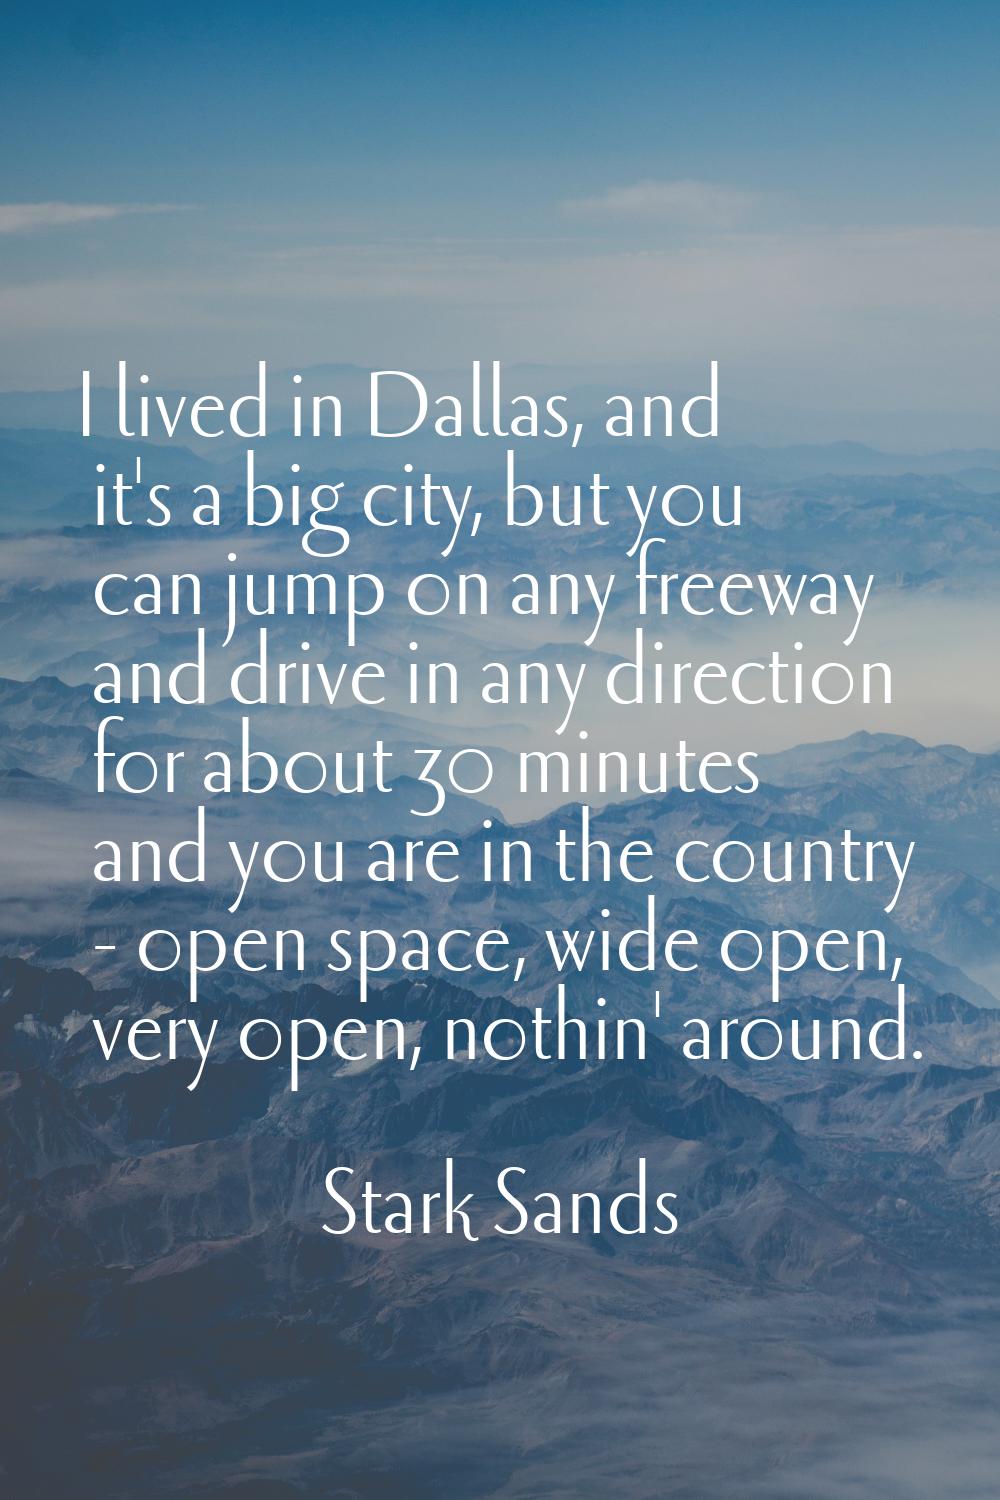 I lived in Dallas, and it's a big city, but you can jump on any freeway and drive in any direction 